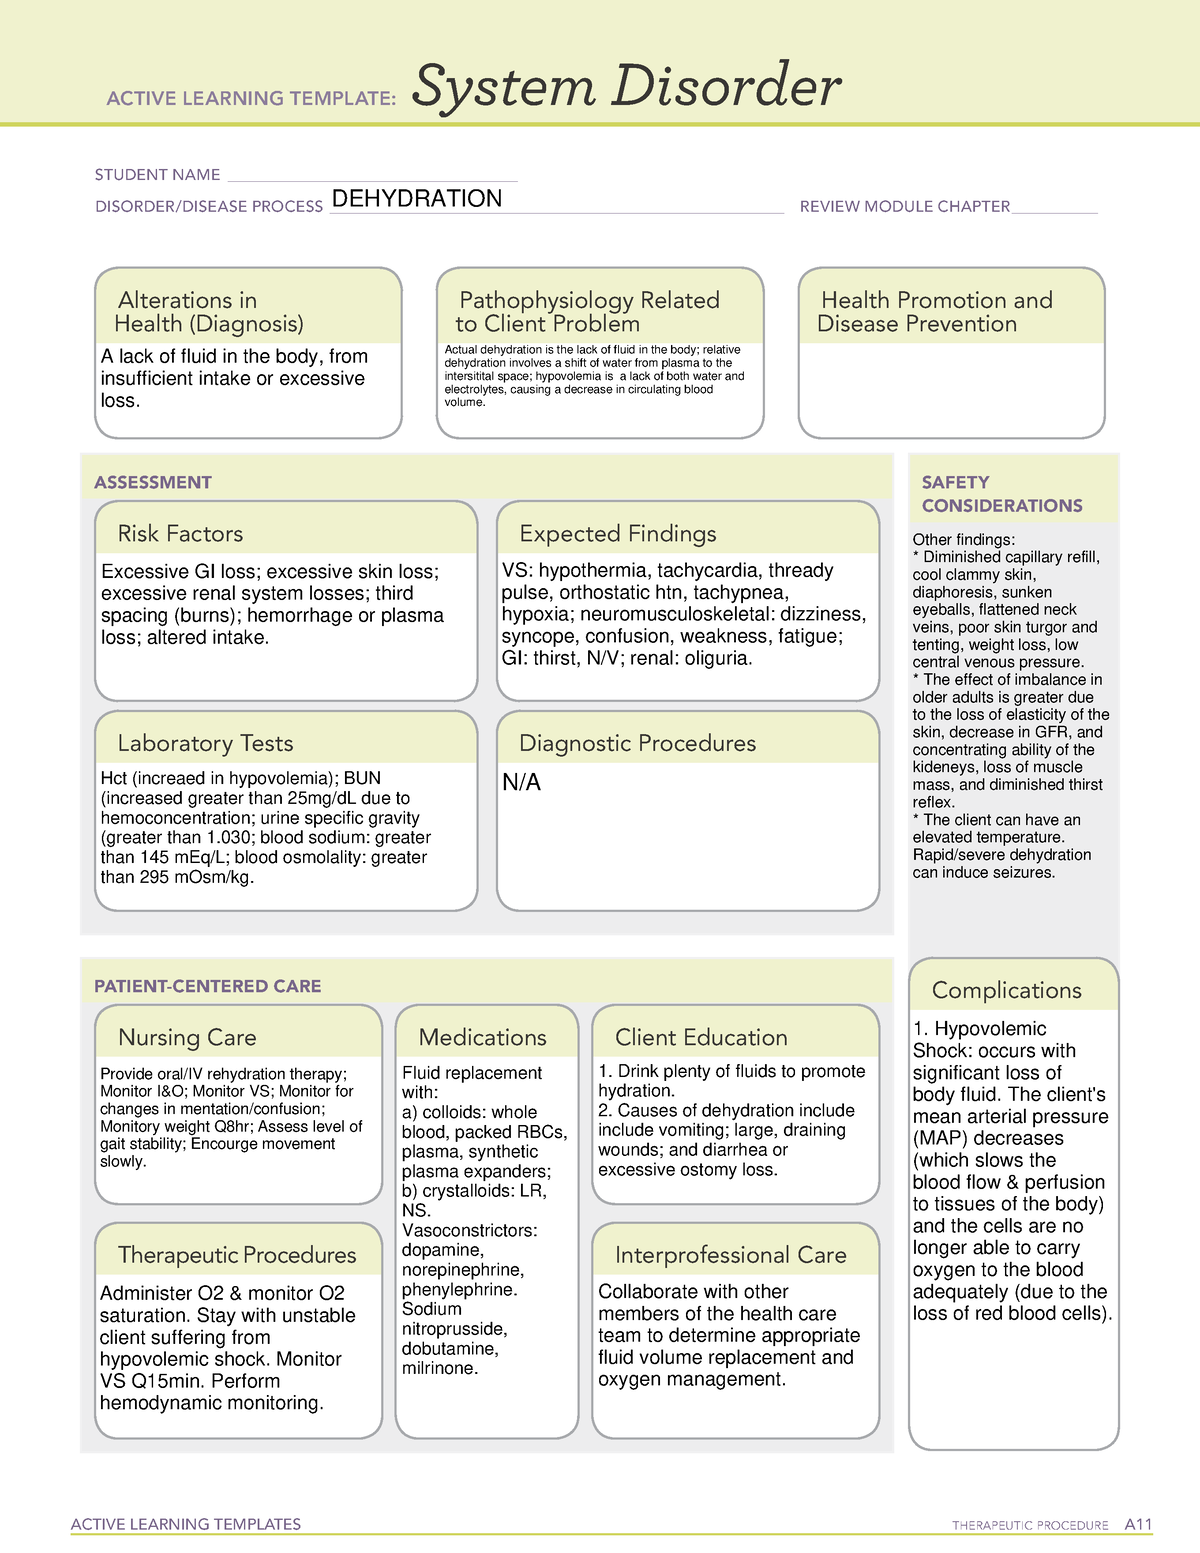 Dehydration - ATI System Disorder - ACTIVE LEARNING TEMPLATES ...